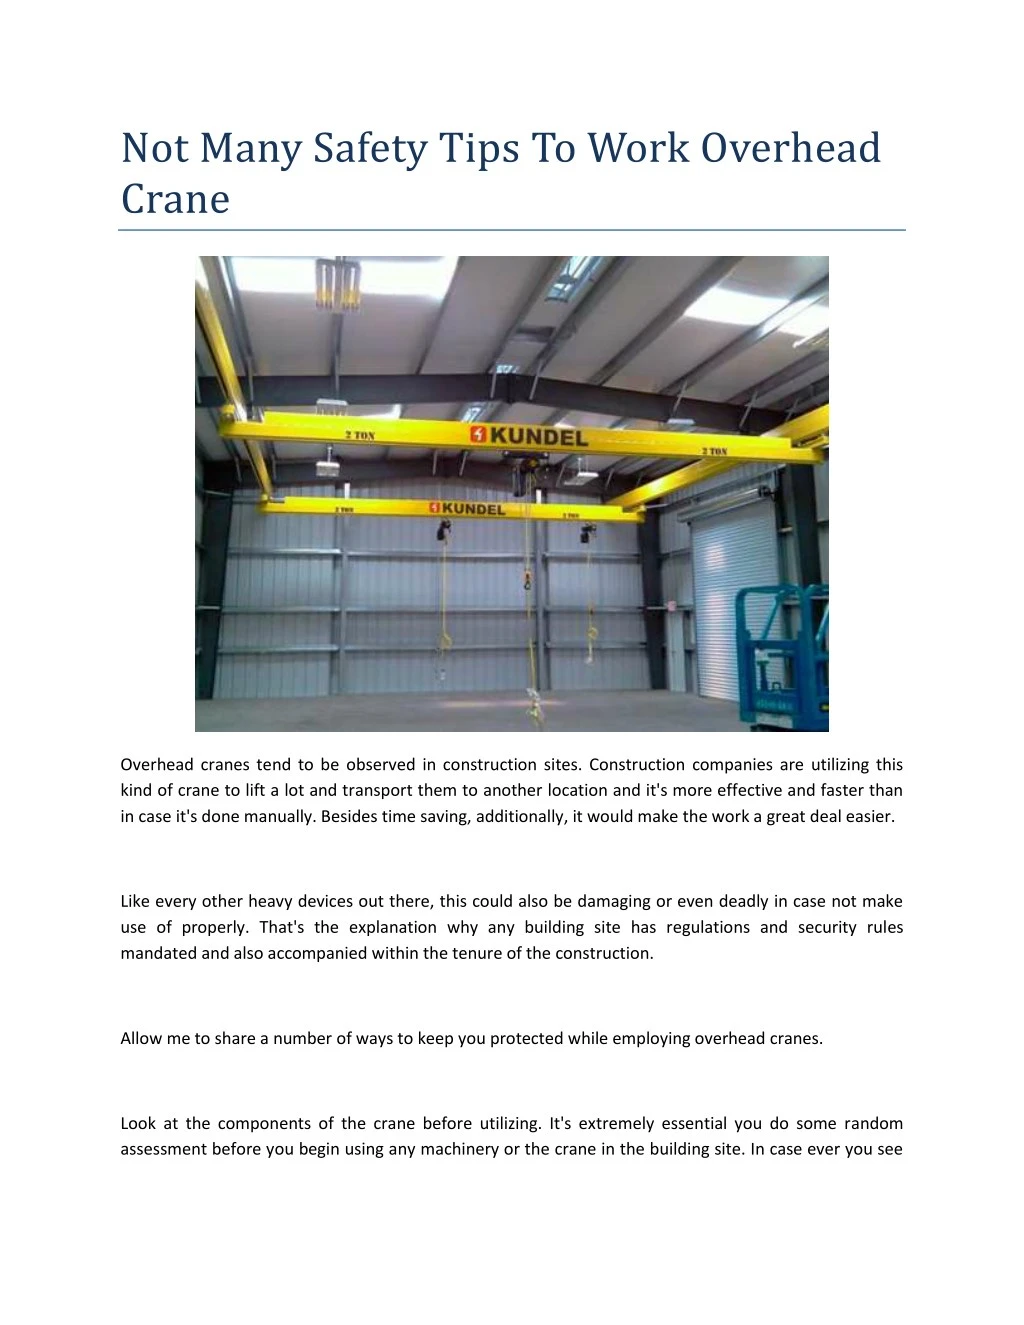 not many safety tips to work overhead crane